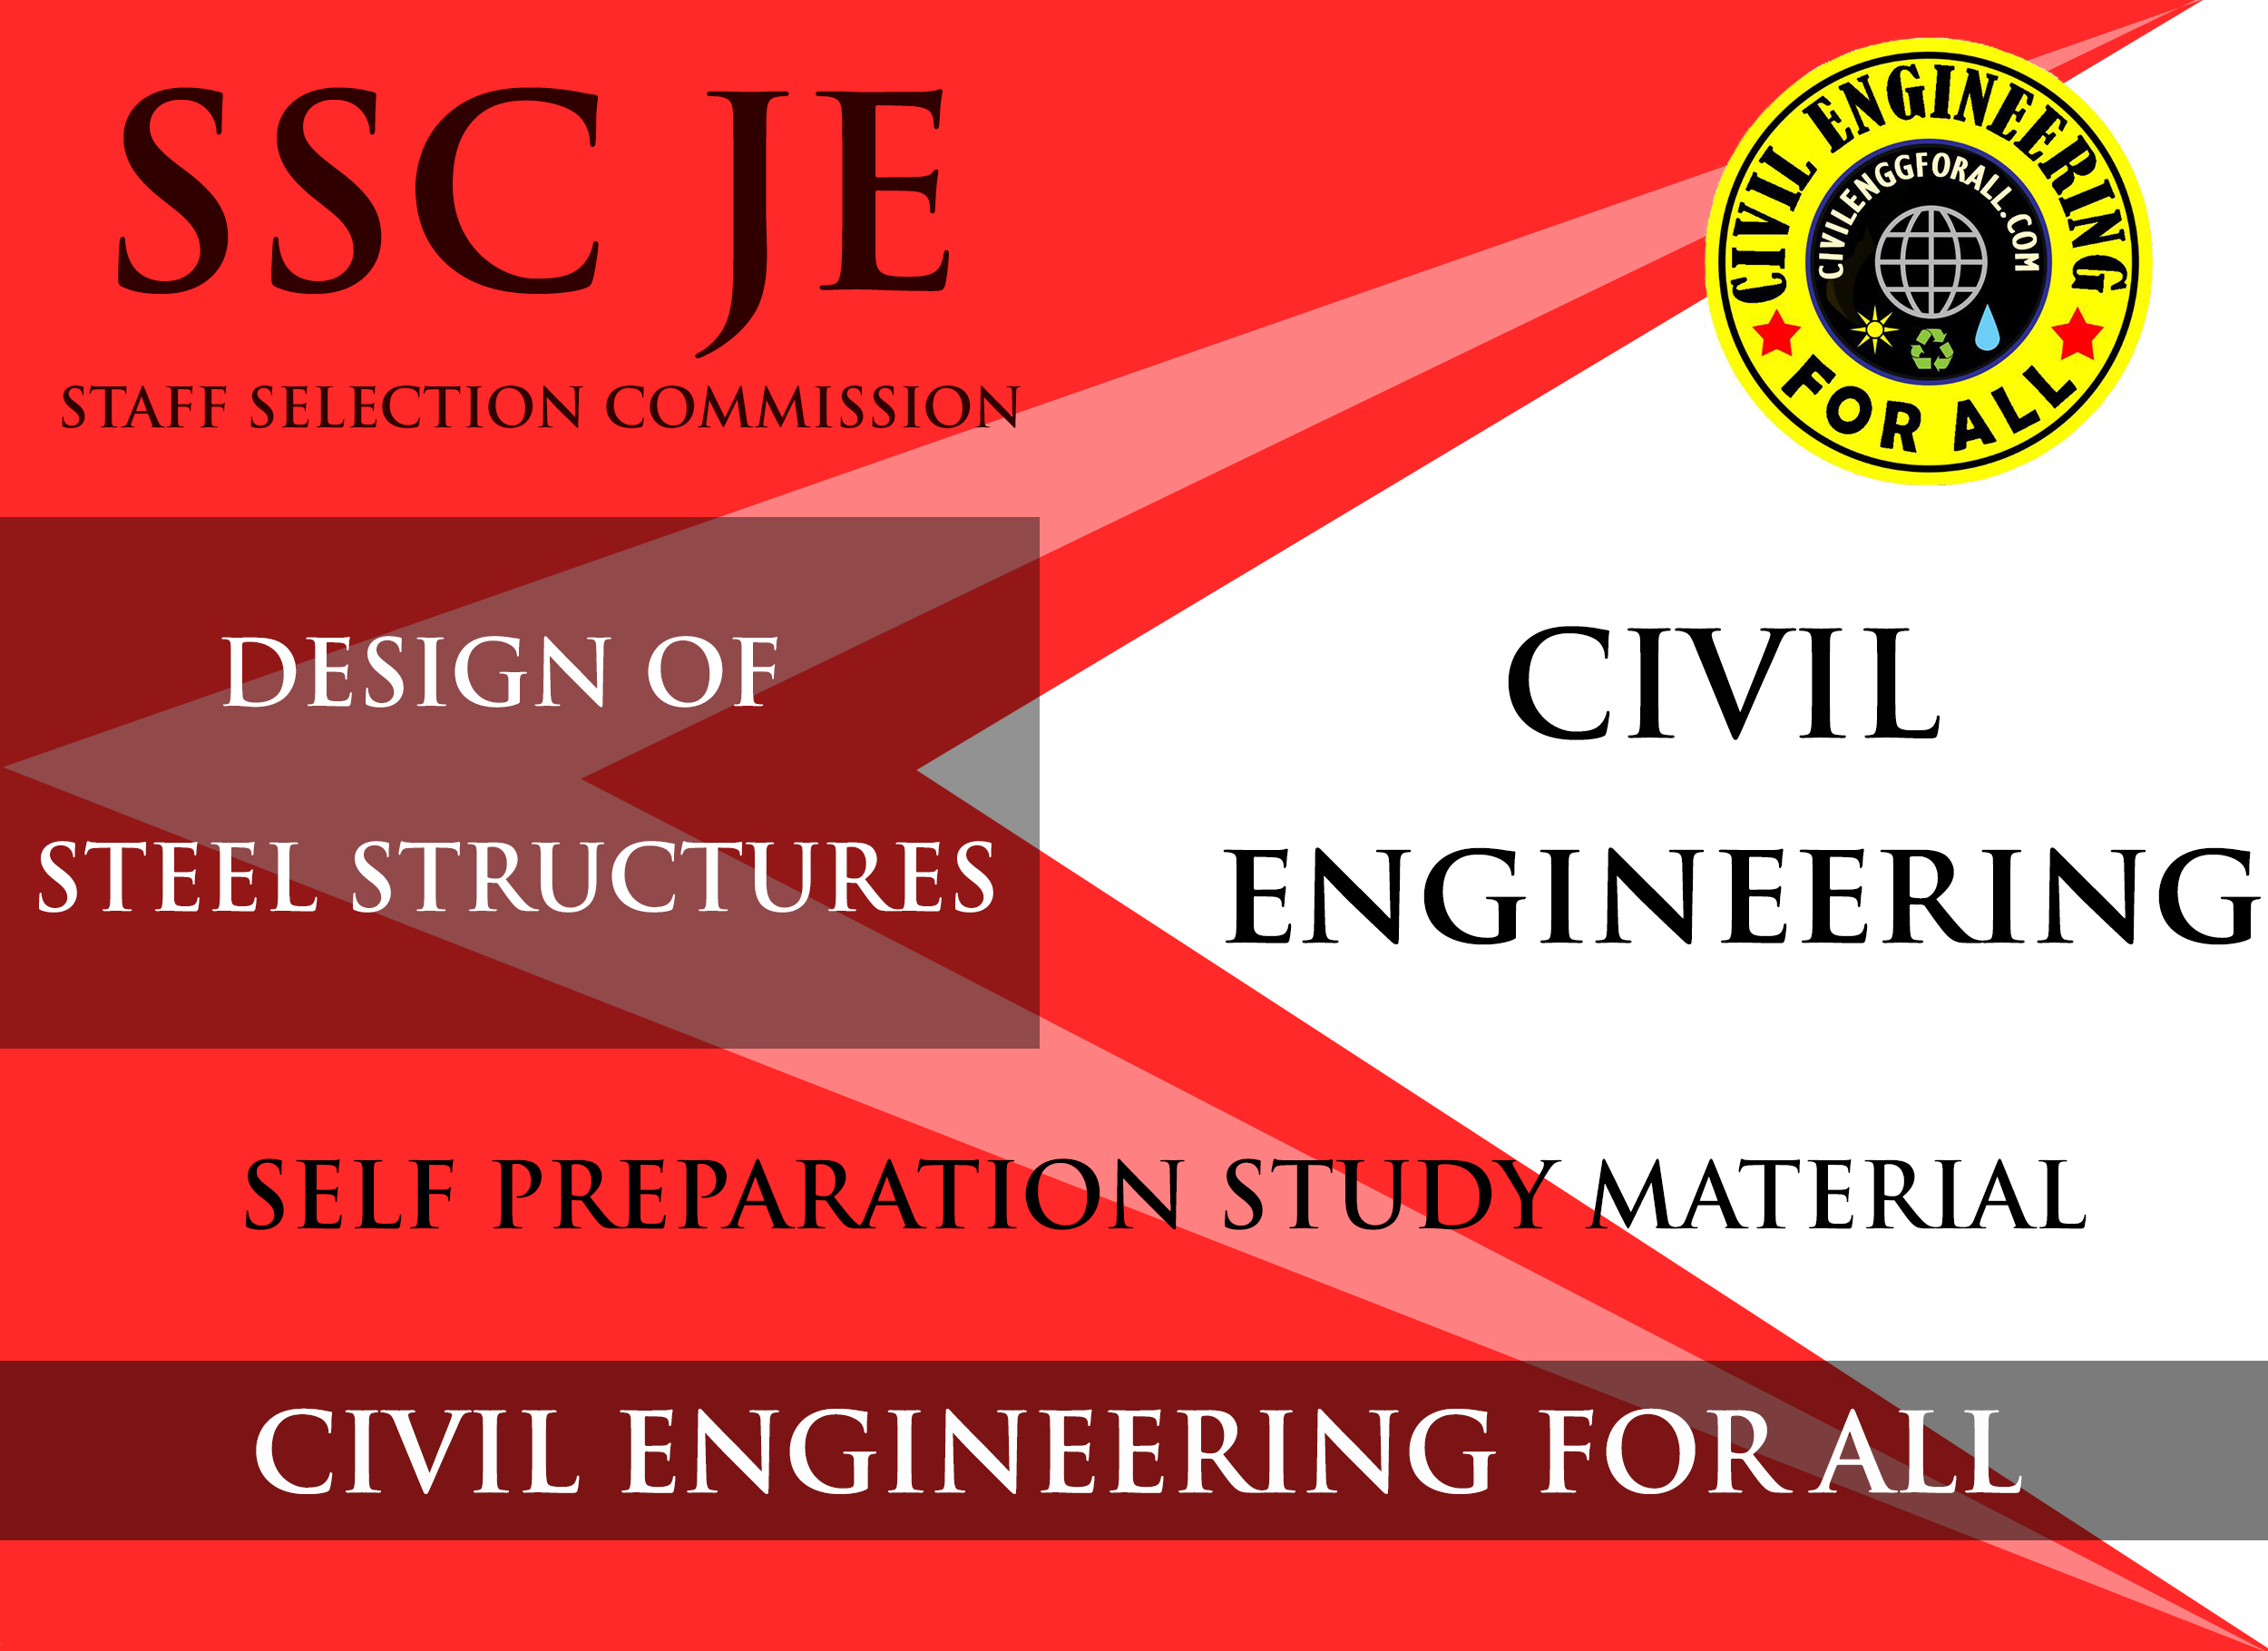 Design of Steel Structures Study Material for SSC Junior Engineer Civil Exam PDF - CivilEnggForAll Exclusive